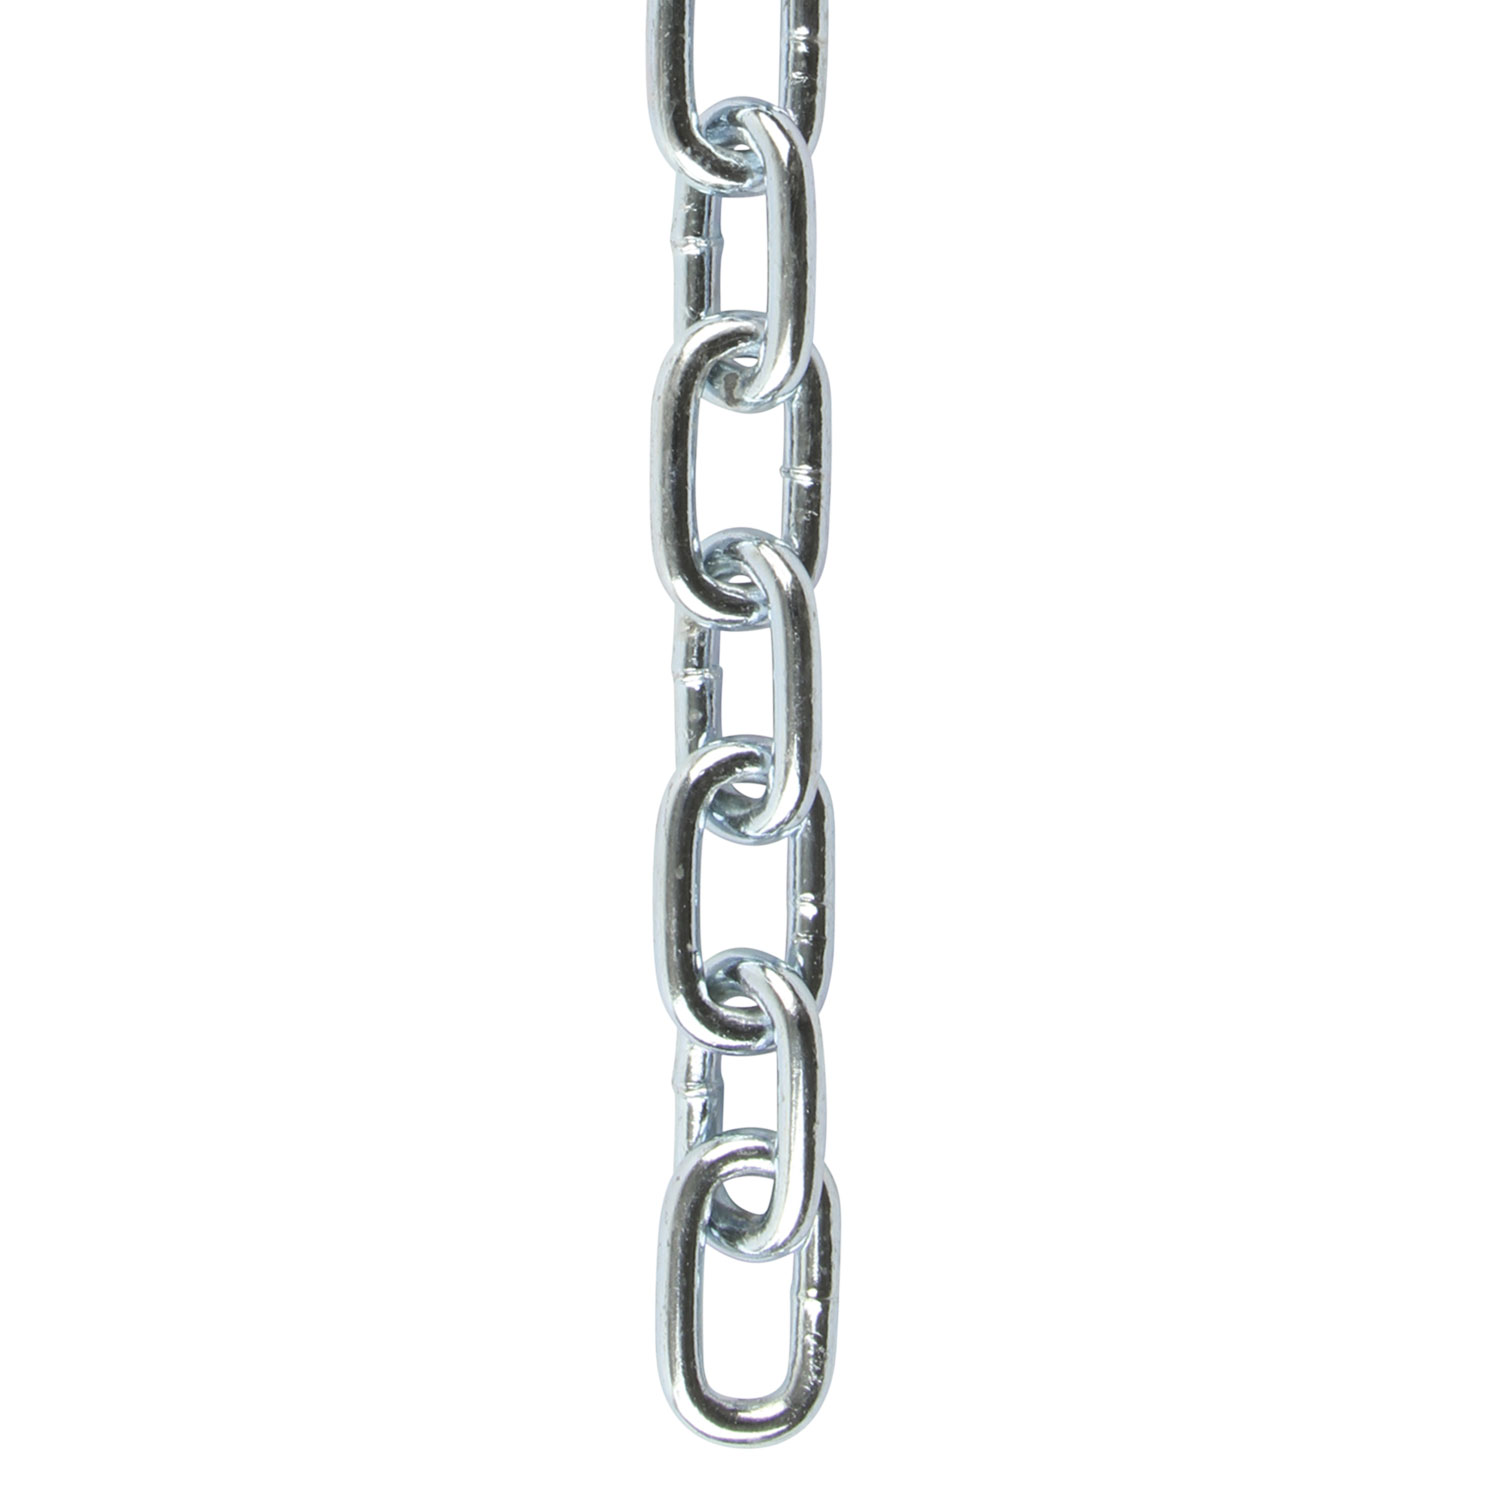 Double Loop Chain  Perfection Chain Products